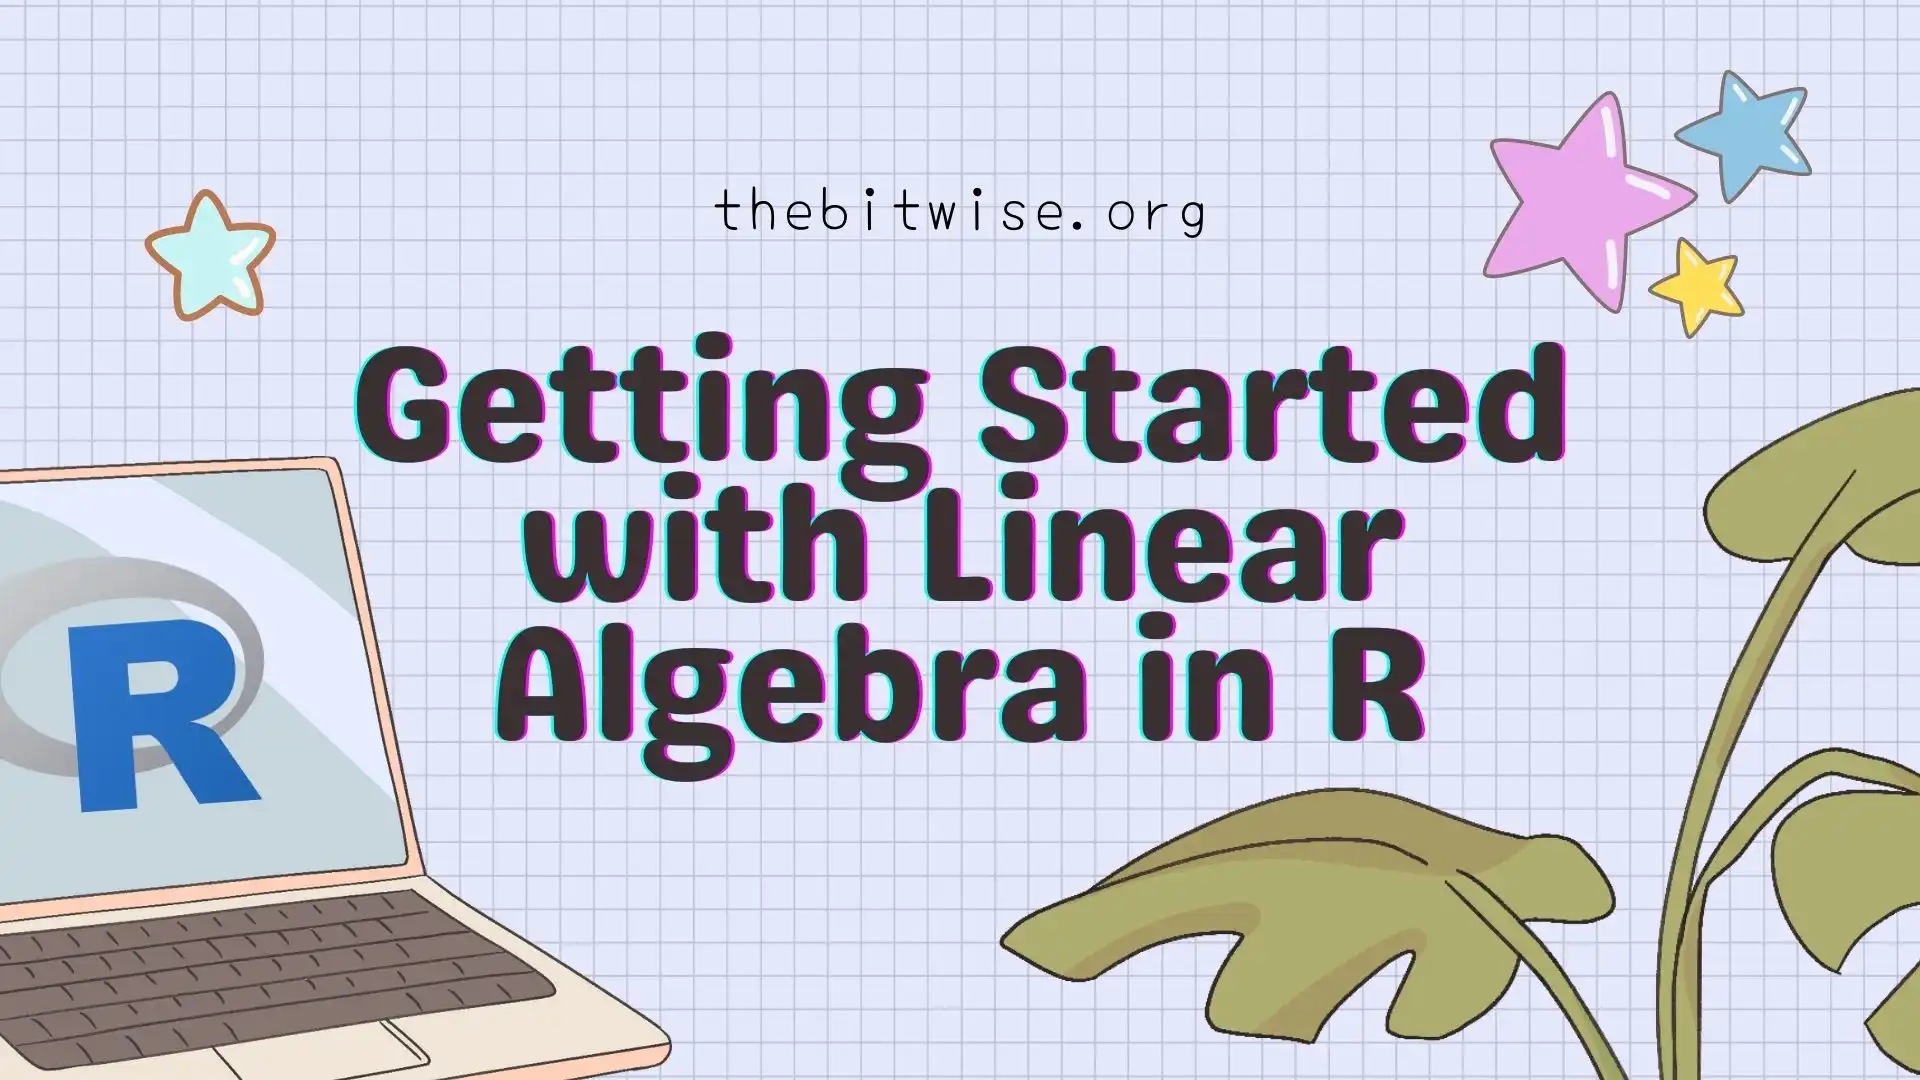 Getting Started with Linear Algebra in R